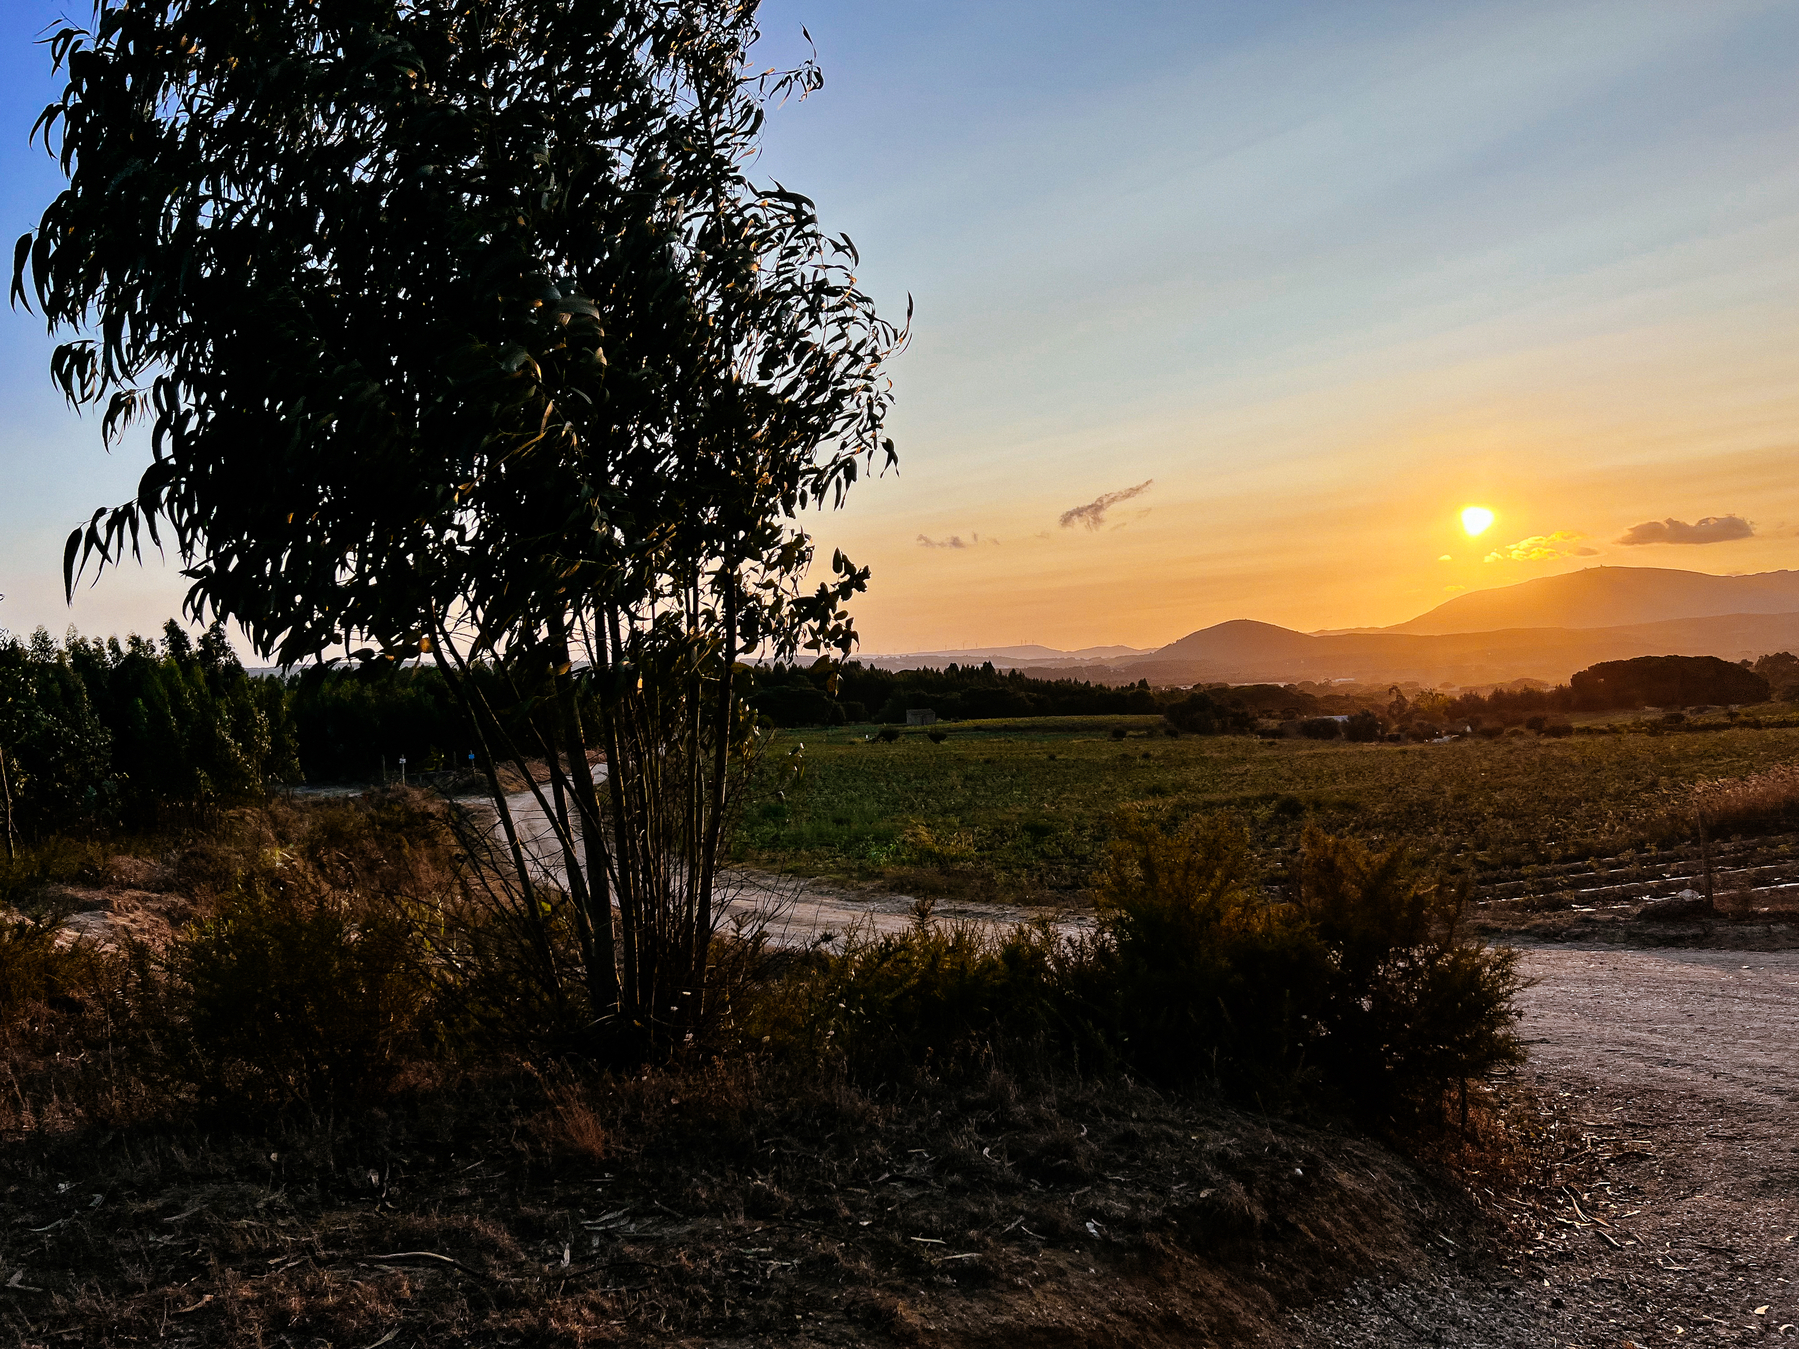 Sunset in a country road. Mountains in the background, a tree (eucalyptus?) in the foreground. 